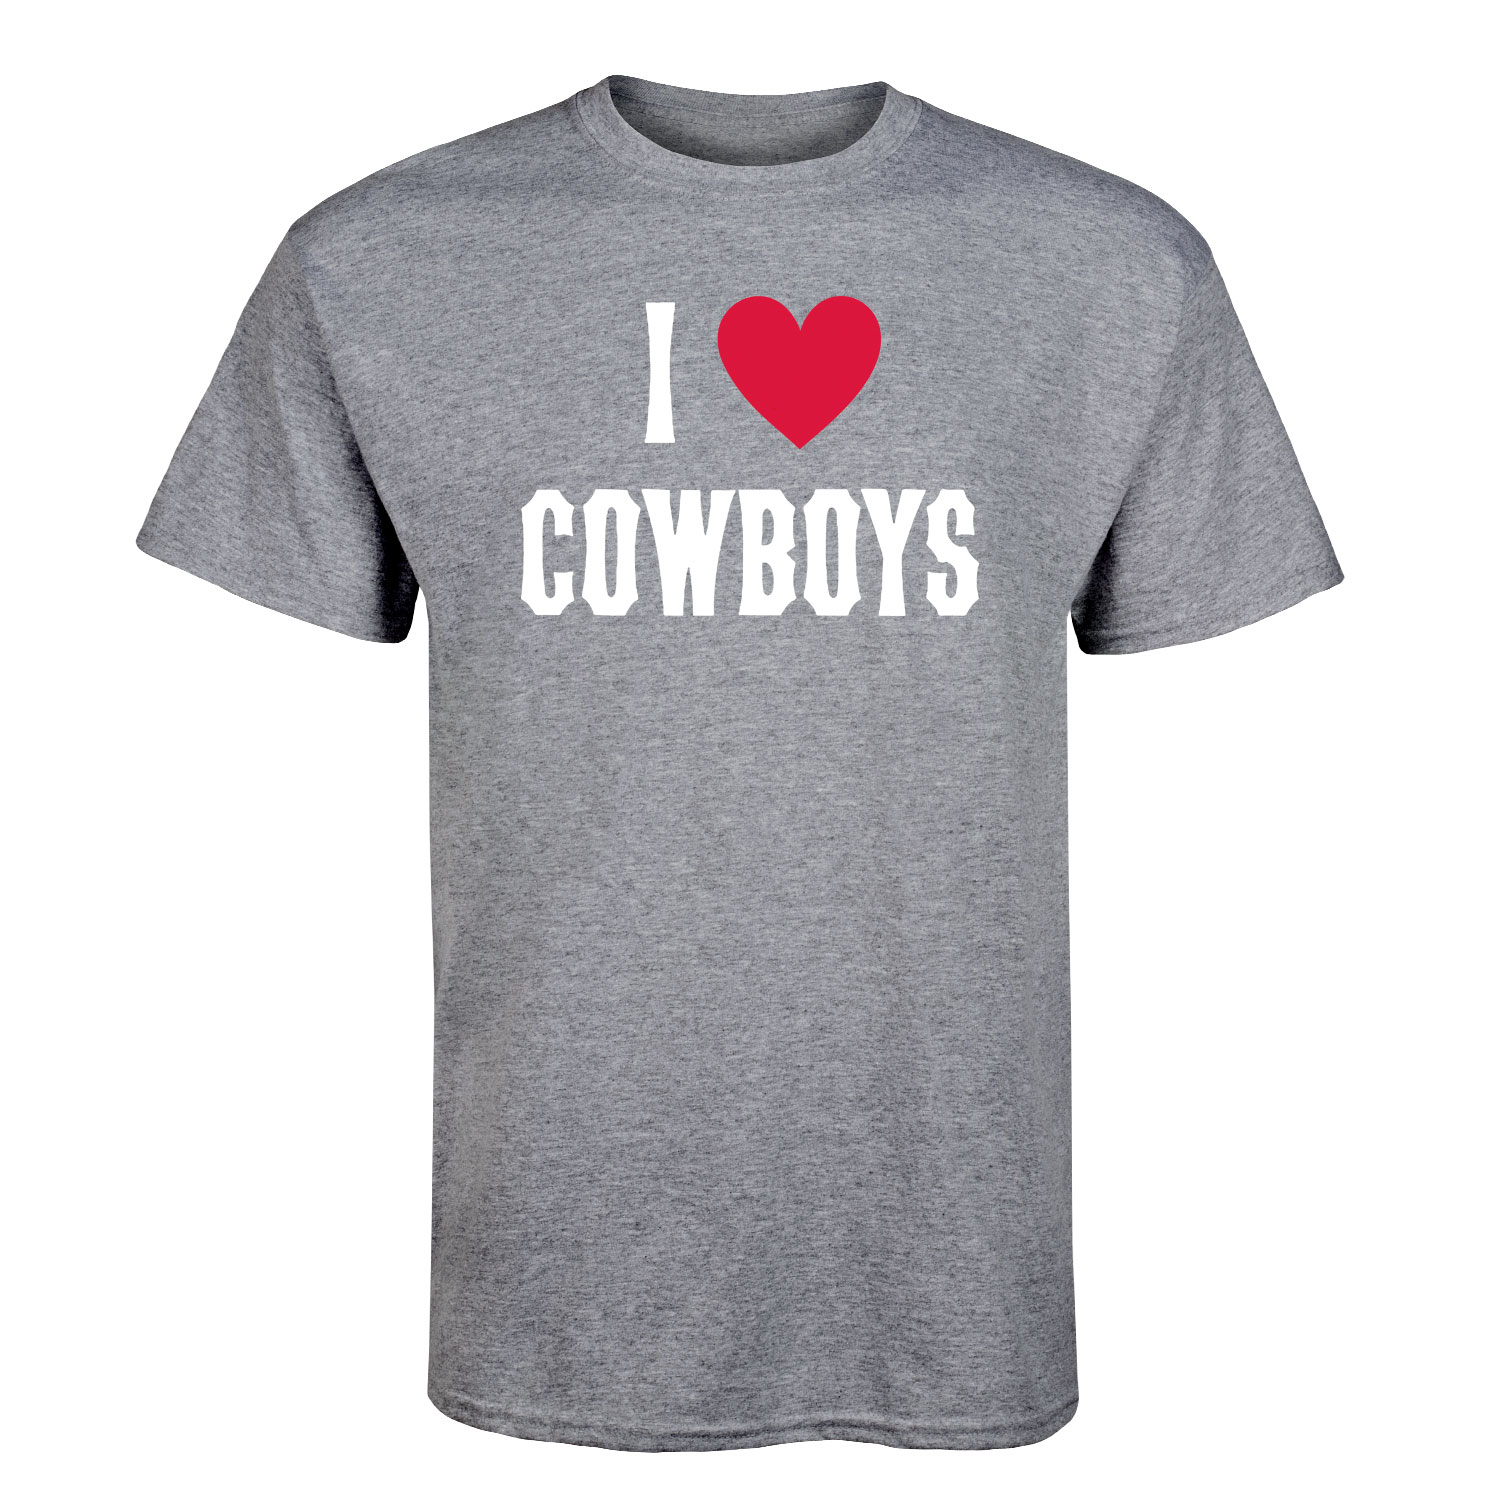 Country Casuals - I Heart Cowboys - Men's Short Sleeve Graphic T-Shirt - image 1 of 2